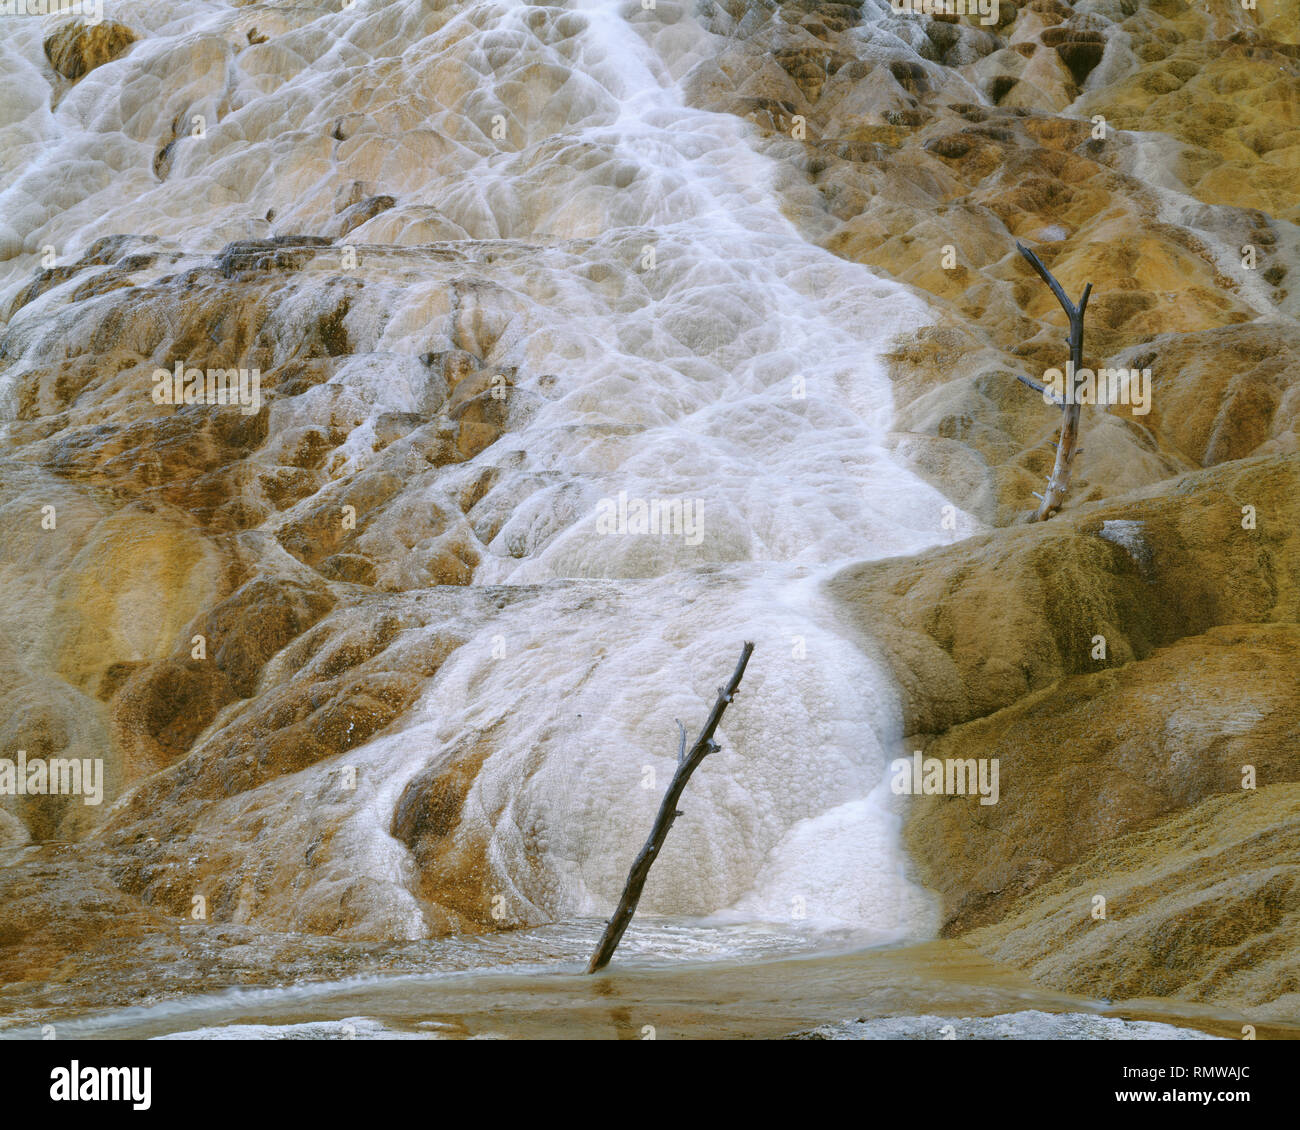 USA, Wyoming, Yellowstone National Park, Palette Spring, formed from layers of microbe-colored travertine, and dead tree, Mammoth Hot Springs Area. Stock Photo